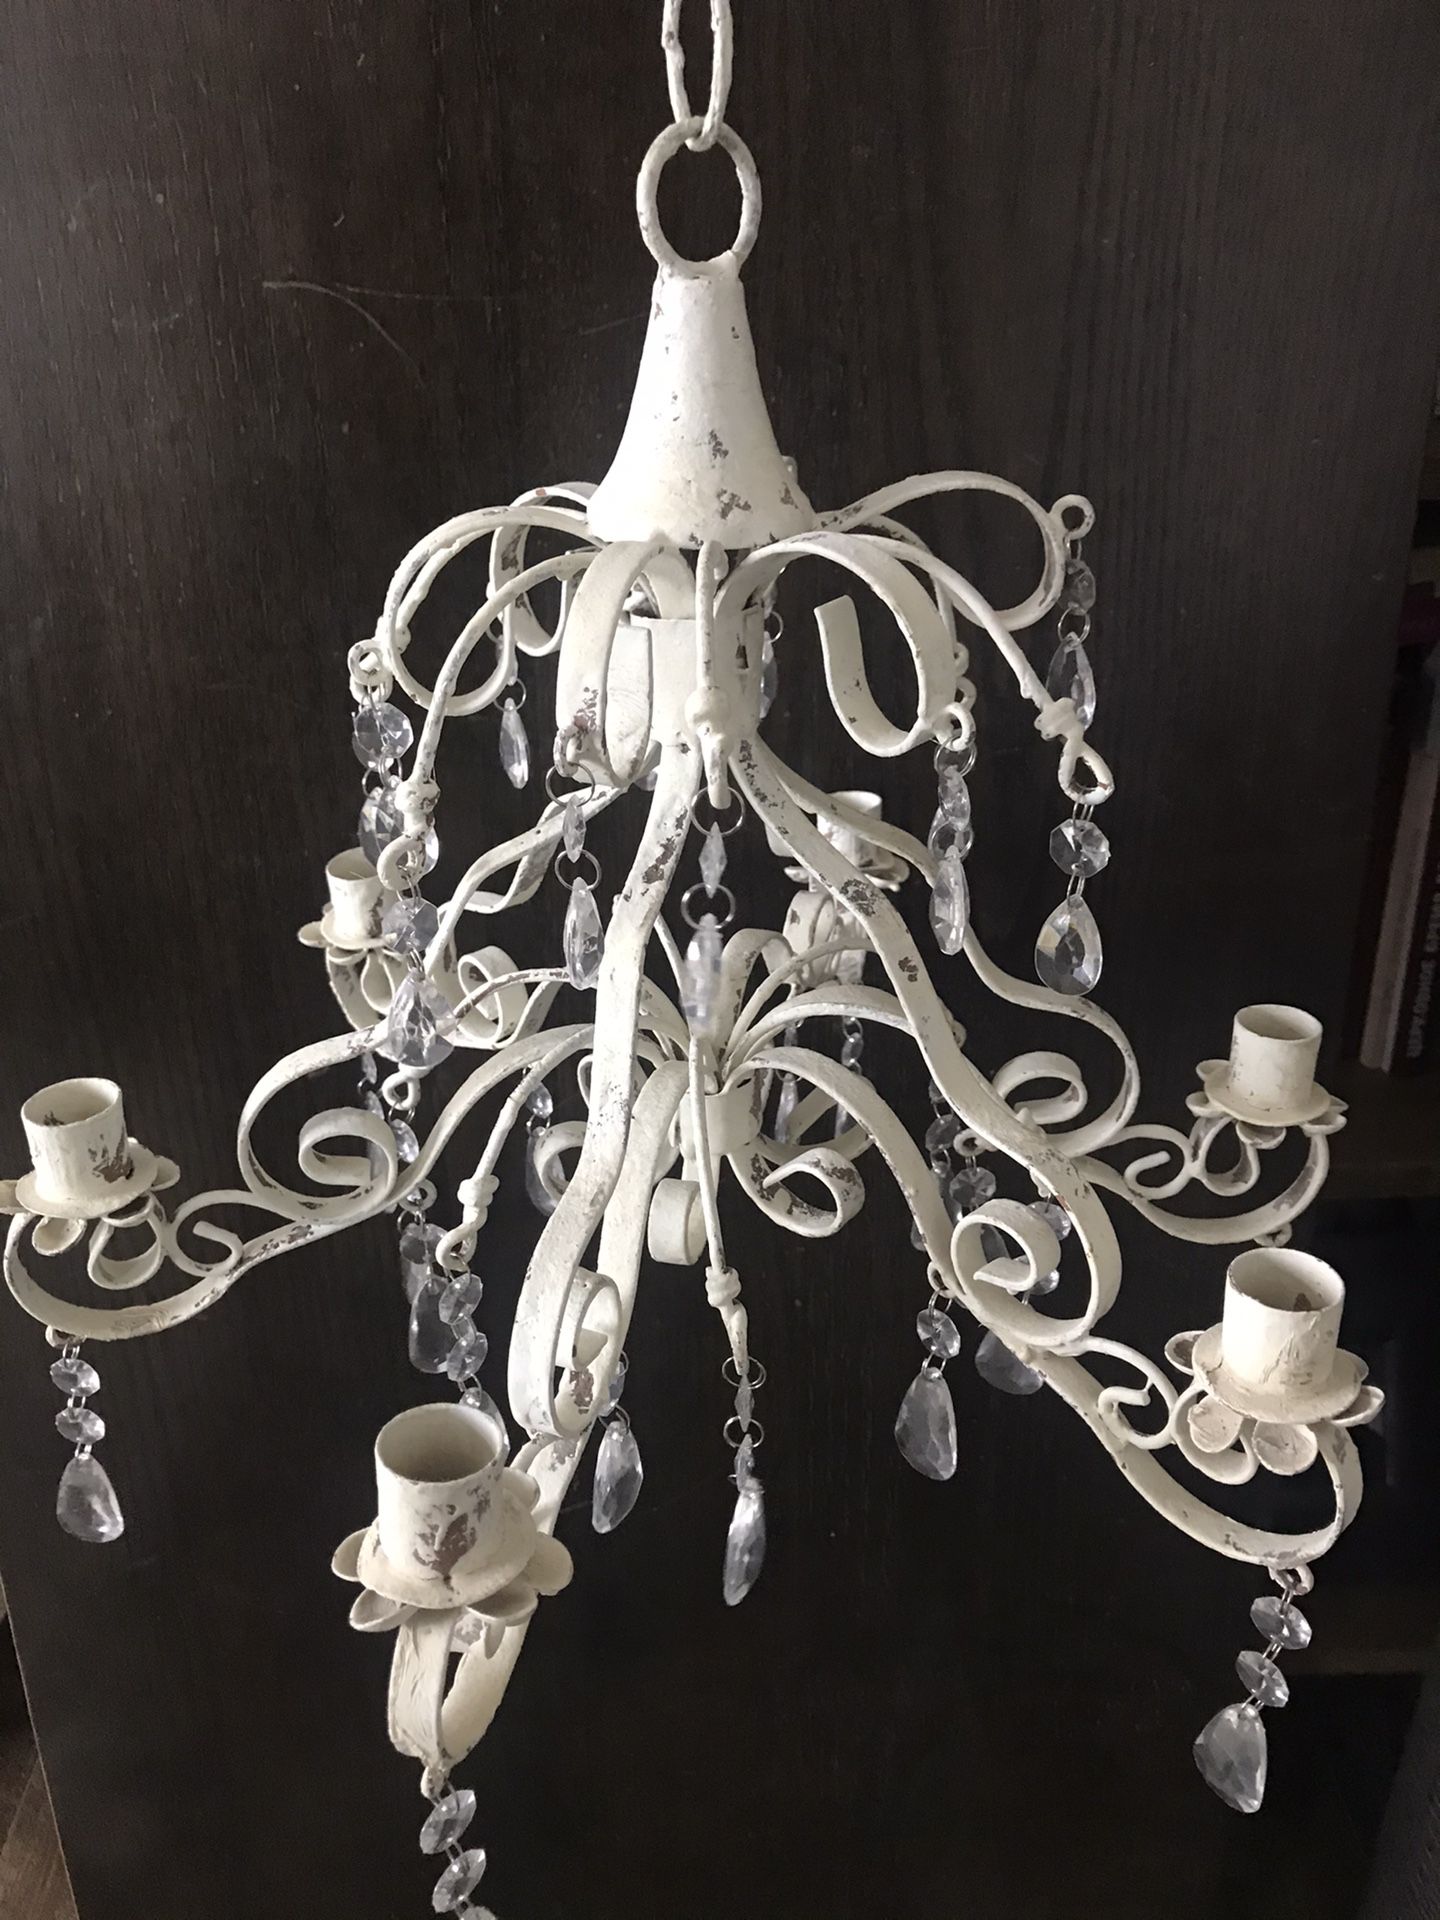 4 Chandeliers/ candle holders ($35/each)